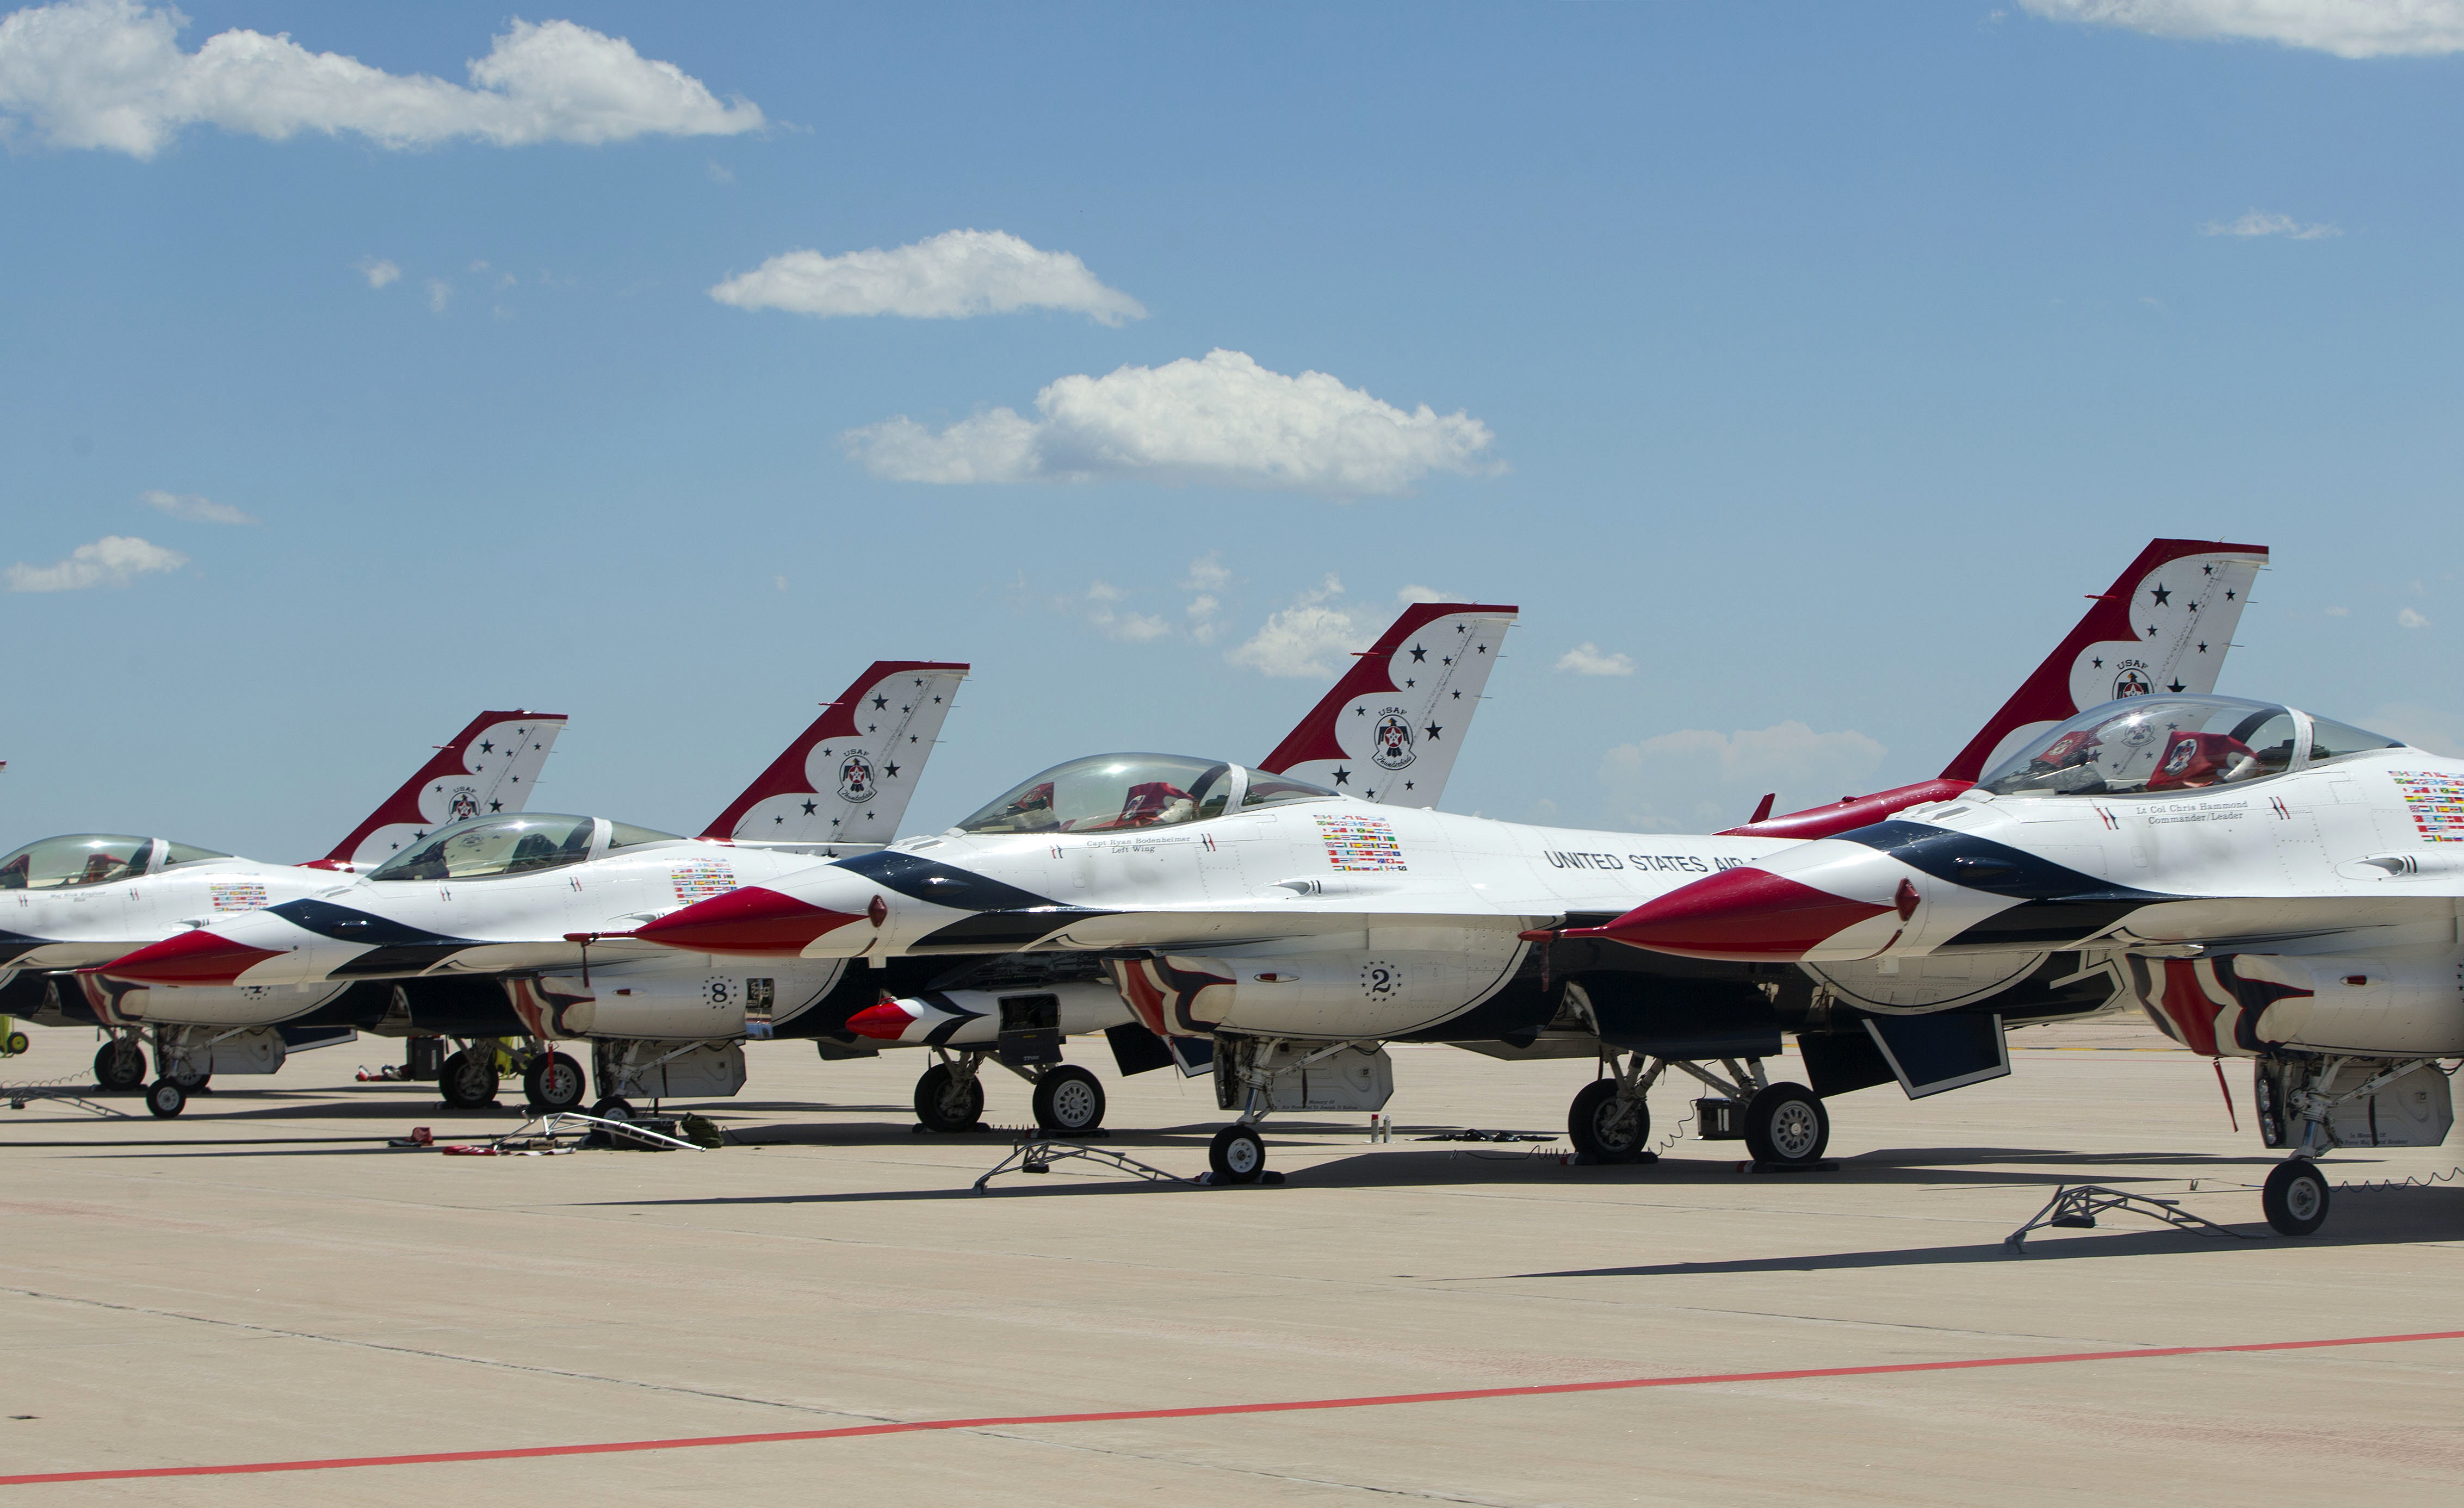 Air Force Thunderbird jets sit on the tarmac at Peterson Air Base, Colo., Thursday, June 2, 2016. An Air Force Thunderbird jet crashed Thursday in Colorado just after a flyover at a graduation ceremony for Air Force Academy cadets where President Barack Obama had spoken. (AP Photo/Pablo Martinez Monsivais)